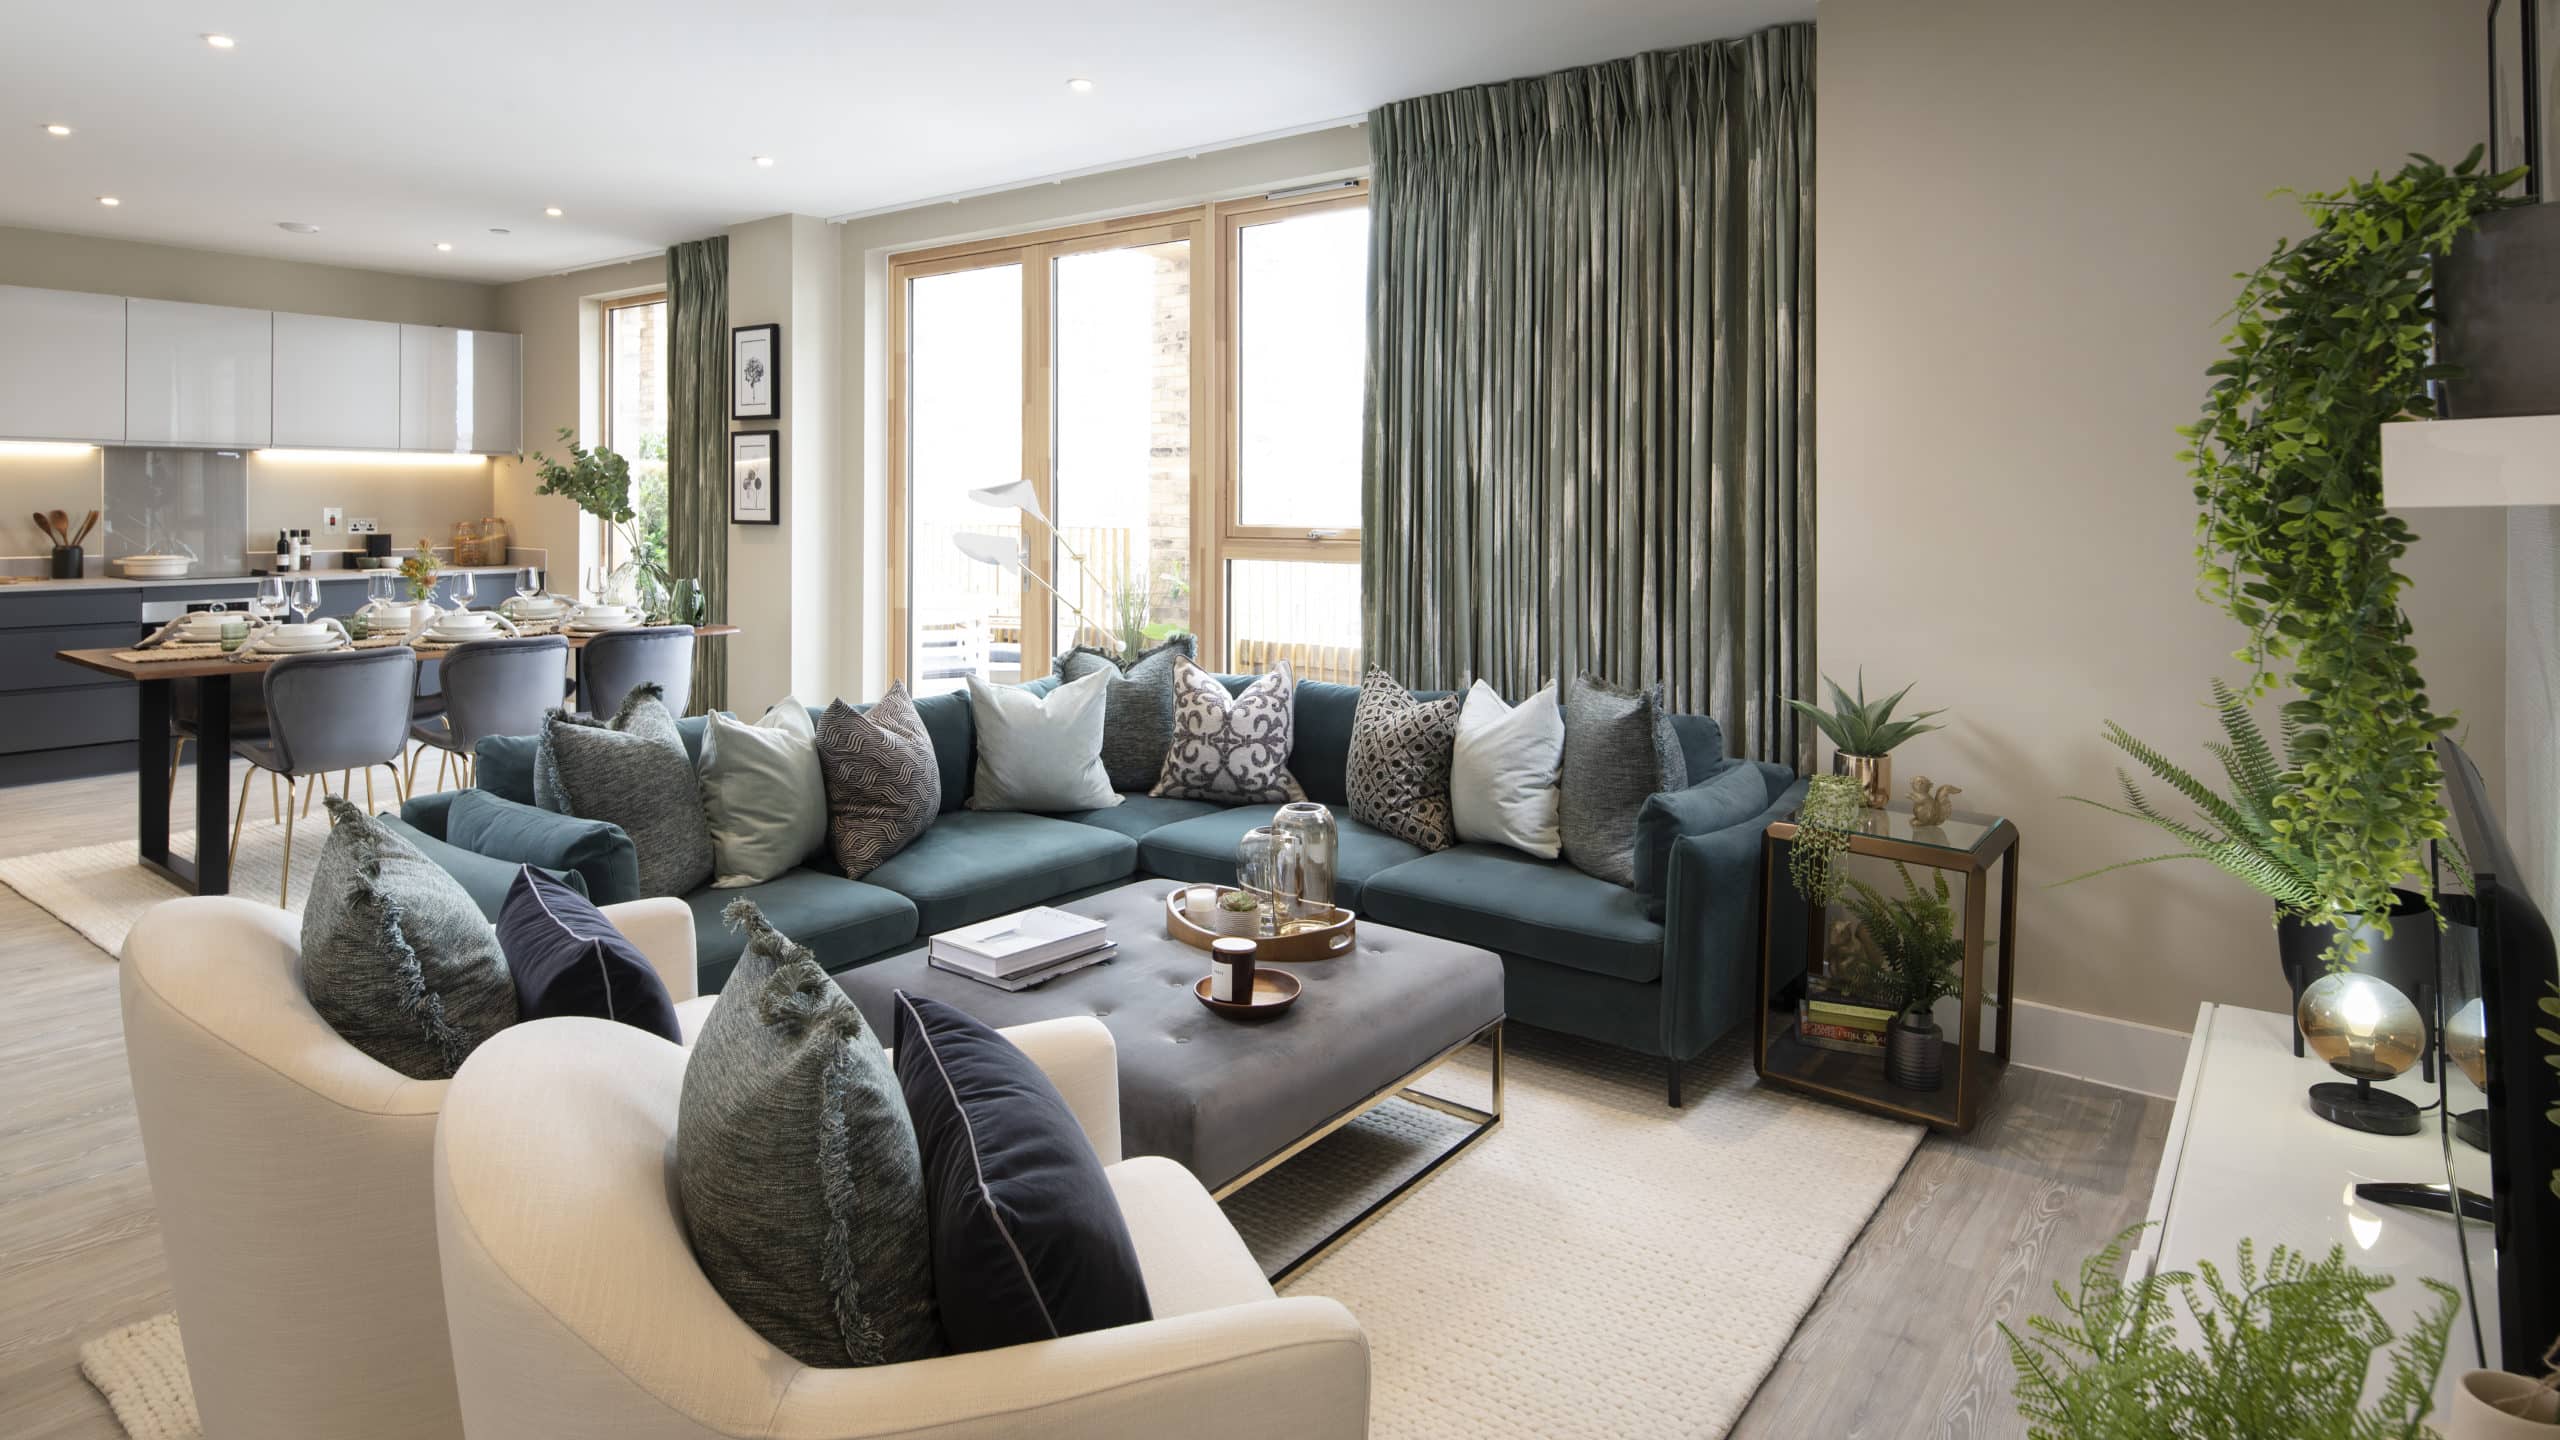 Interior show home of Peabody's Southmere - Help to Buy homes available on Share to Buy